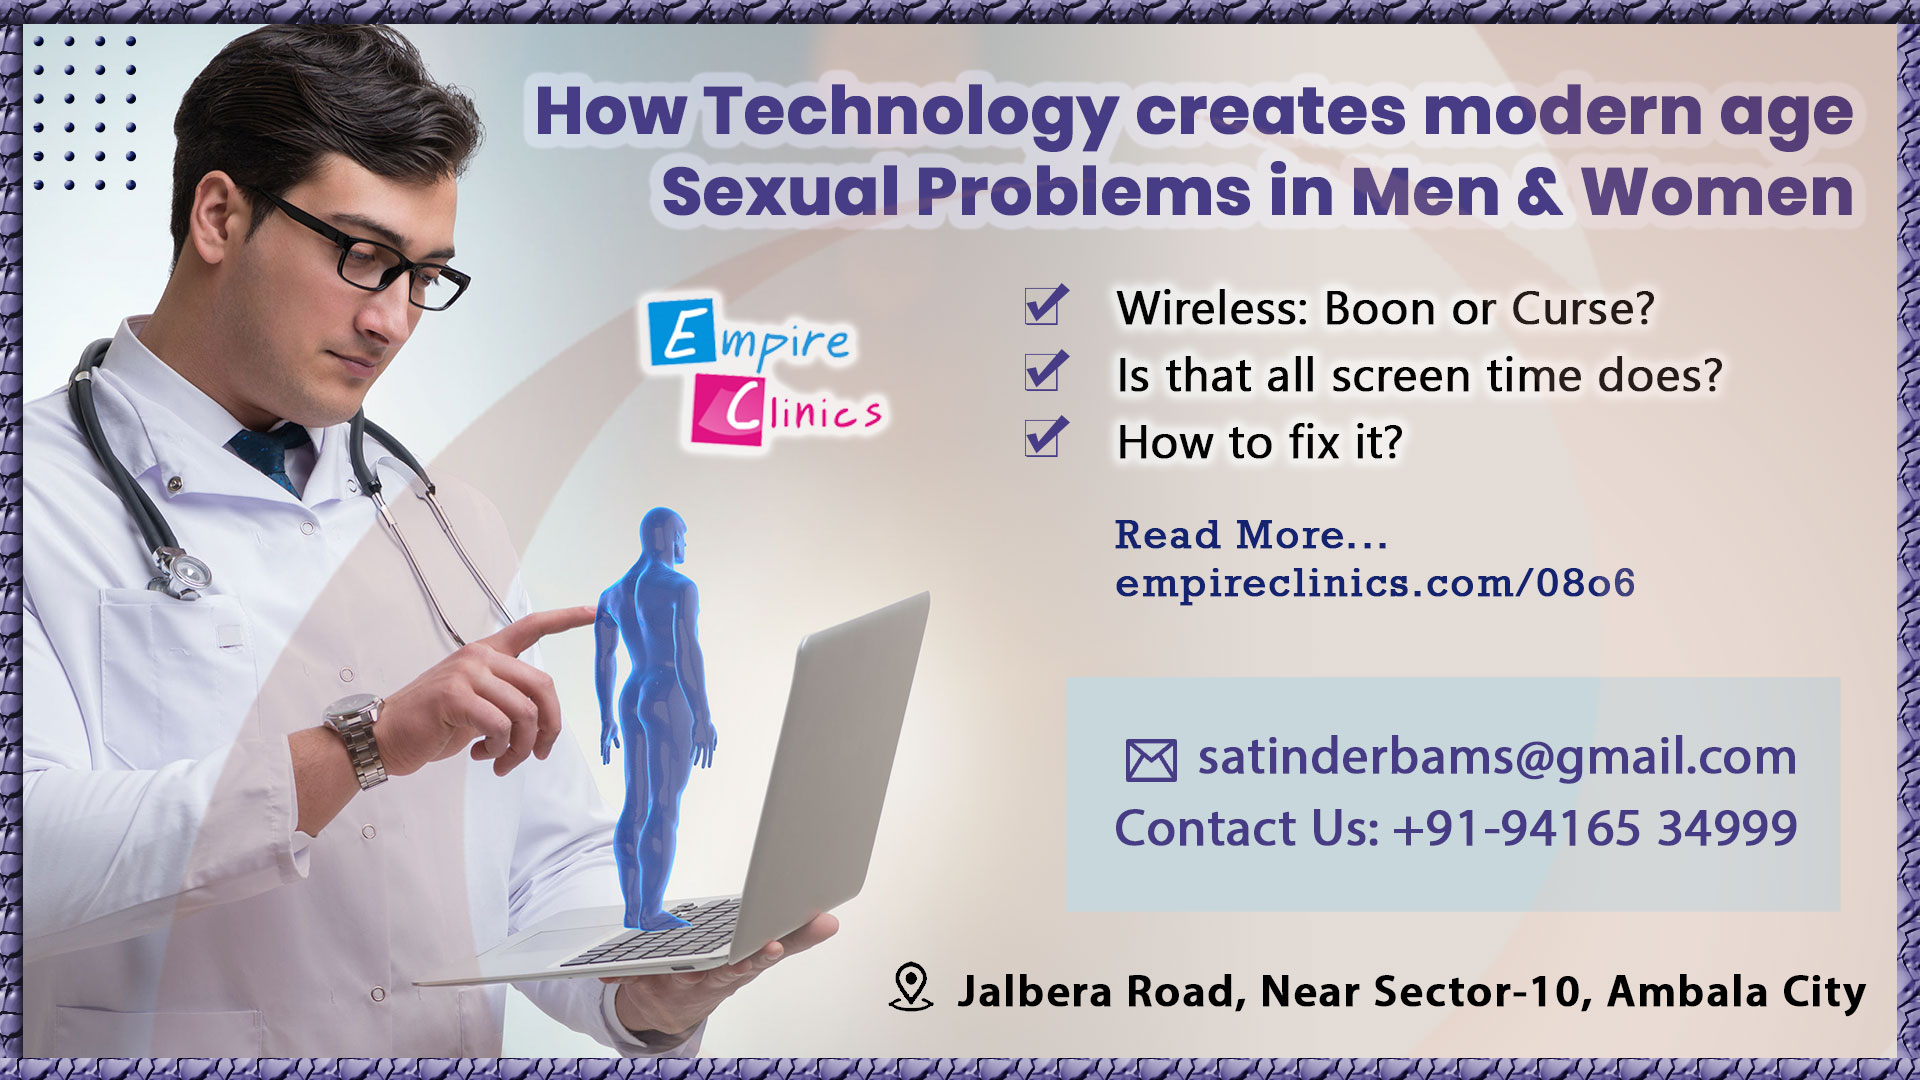 How Technology Creates Modern Age Sexual Problems?